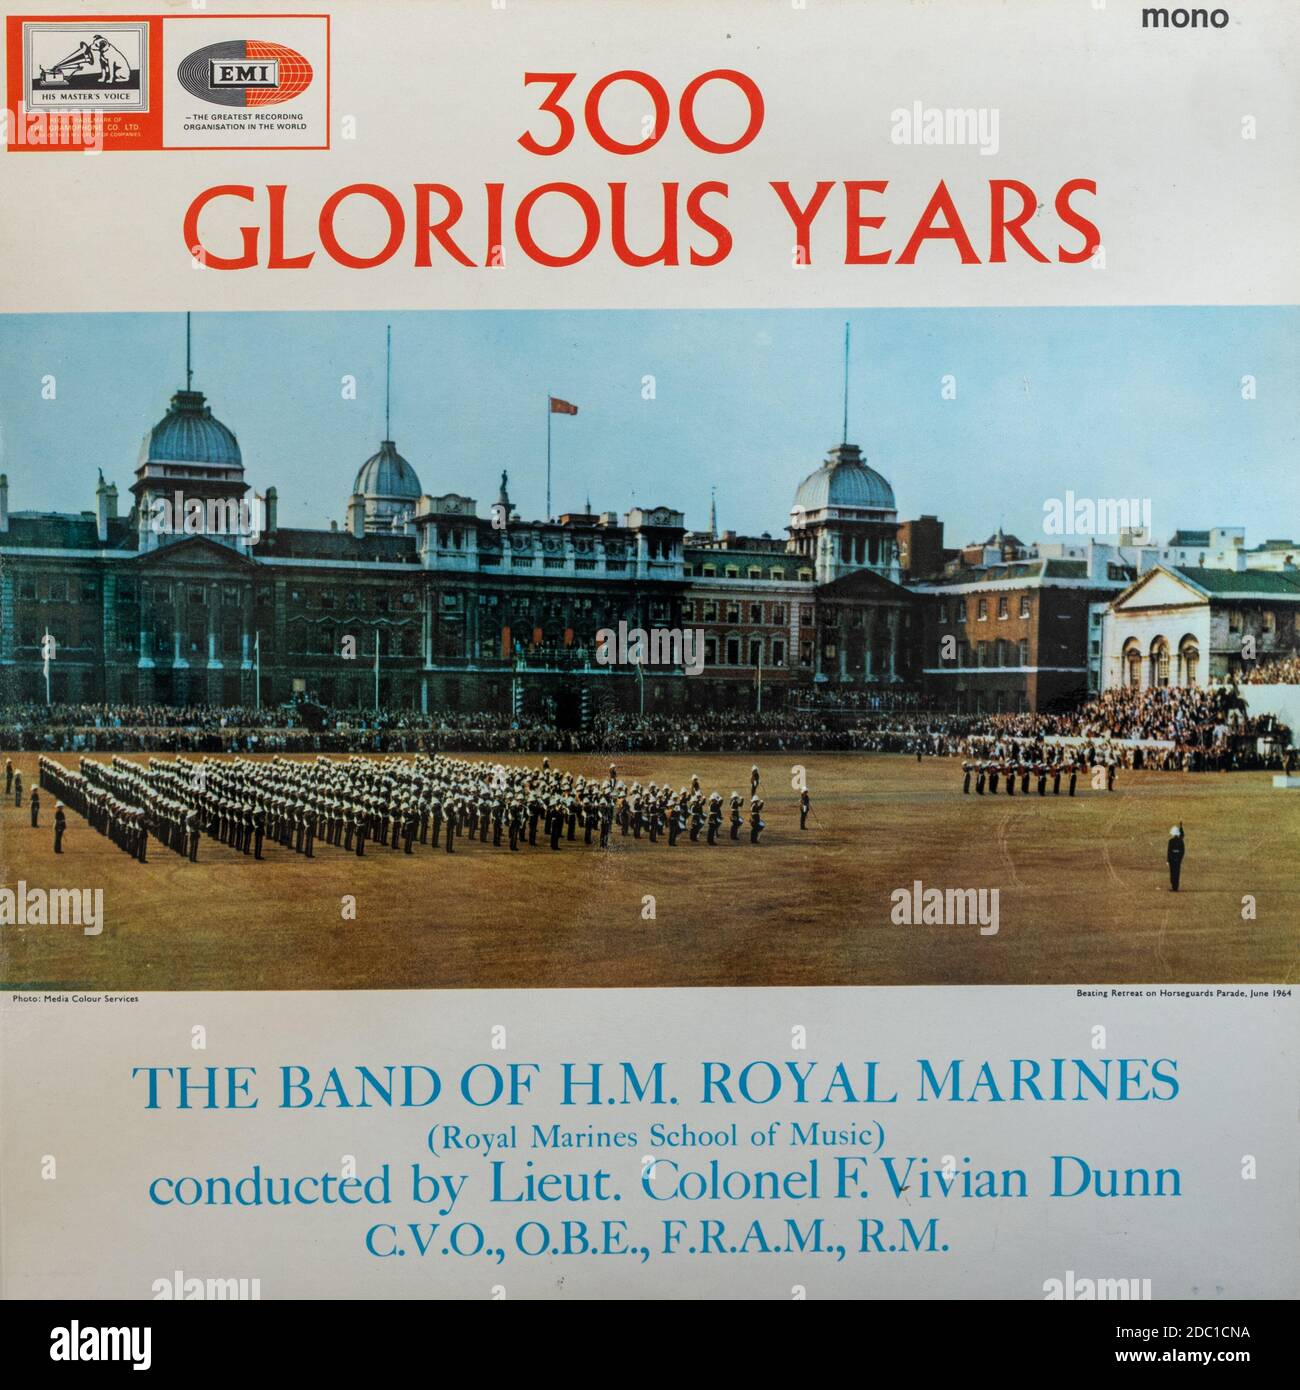 300 Glorious Years of The Band of H.M. Royal Marines, vinyl LP record album cover Stock Photo